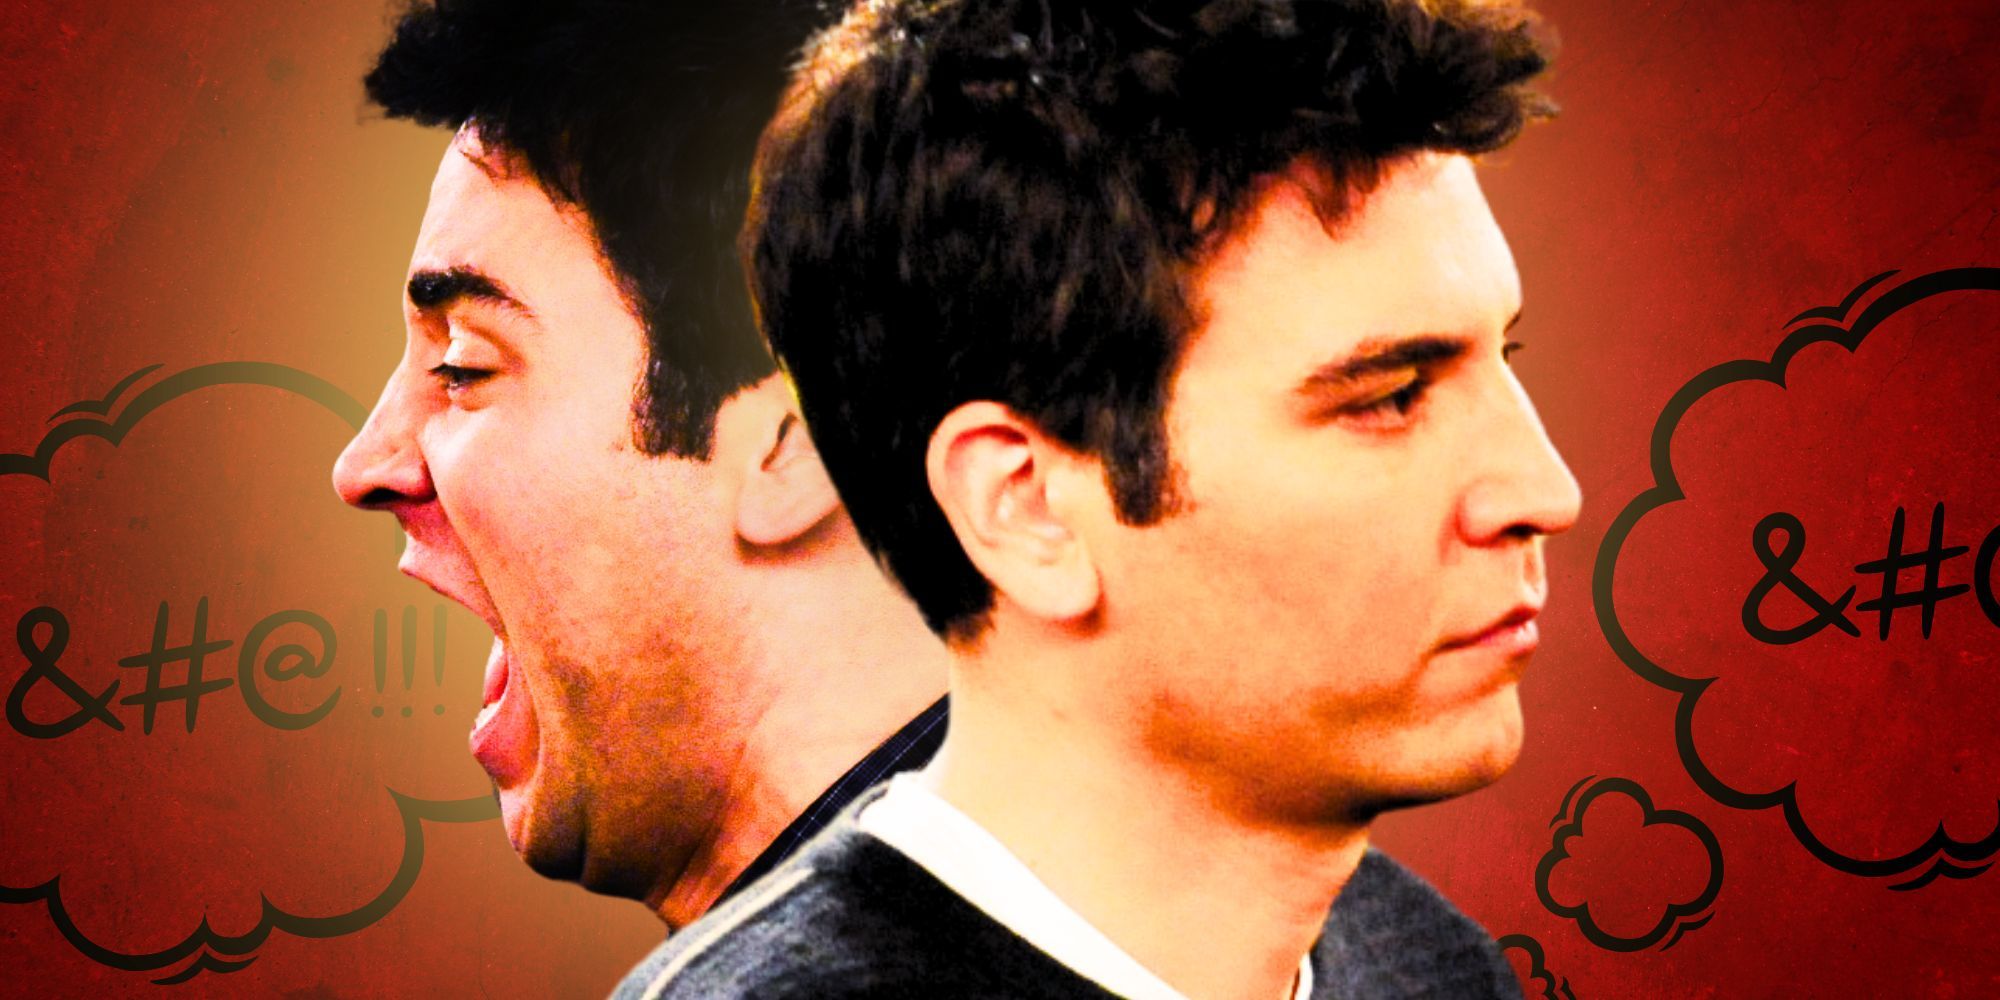 Two side-by-side images of Josh Radnor as Ted Mosby in How I Met Your Mother